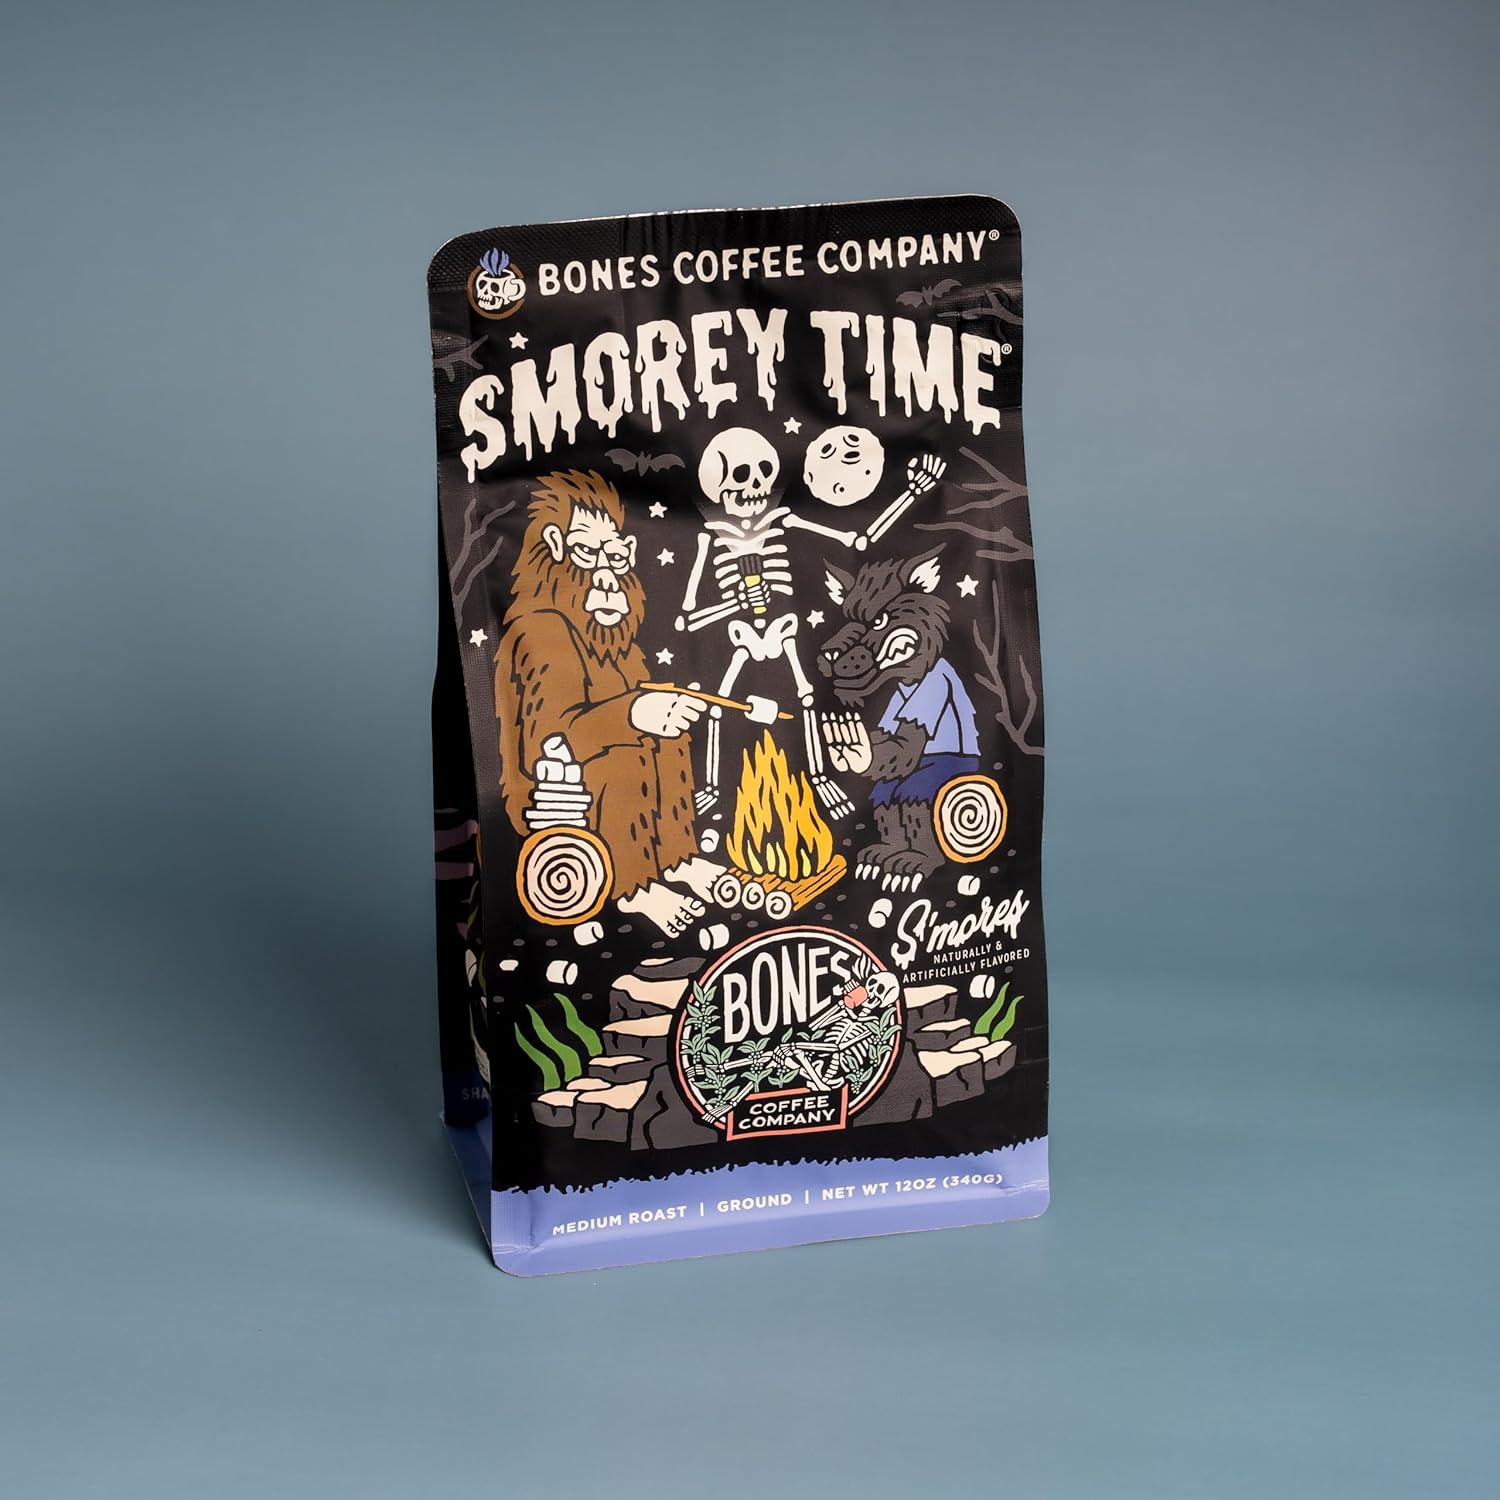 Bones Coffee Company S'morey Time Ground Coffee Beans S'mores and Graham Crackers Flavor | 12 oz Medium Roast Low Acid Coffee | Flavored Coffee Gifts & Beverages (Ground) : Grocery & Gourmet Food